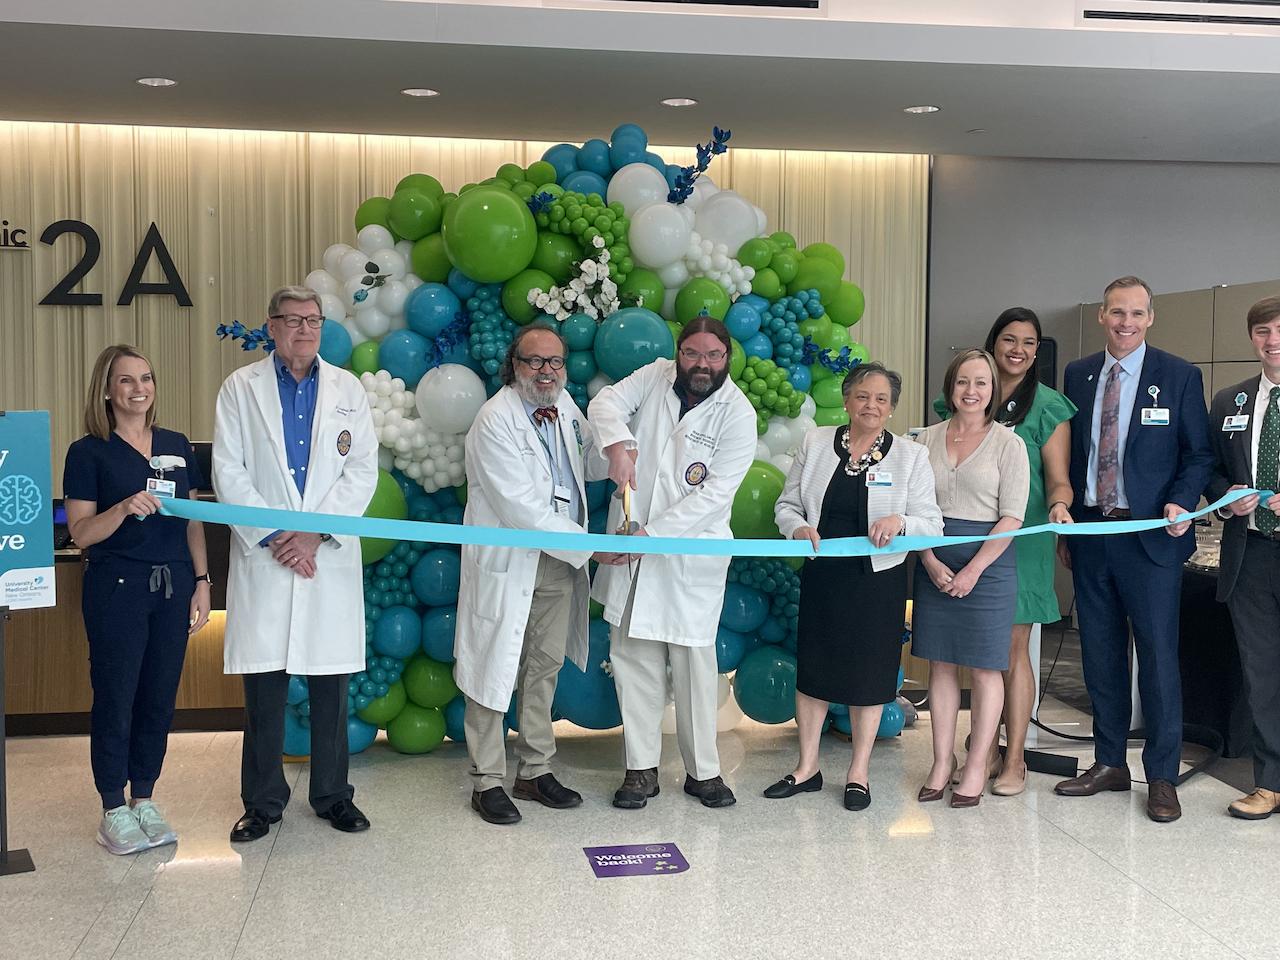 This image shows a group of people cutting the ribbon on a new clinic space